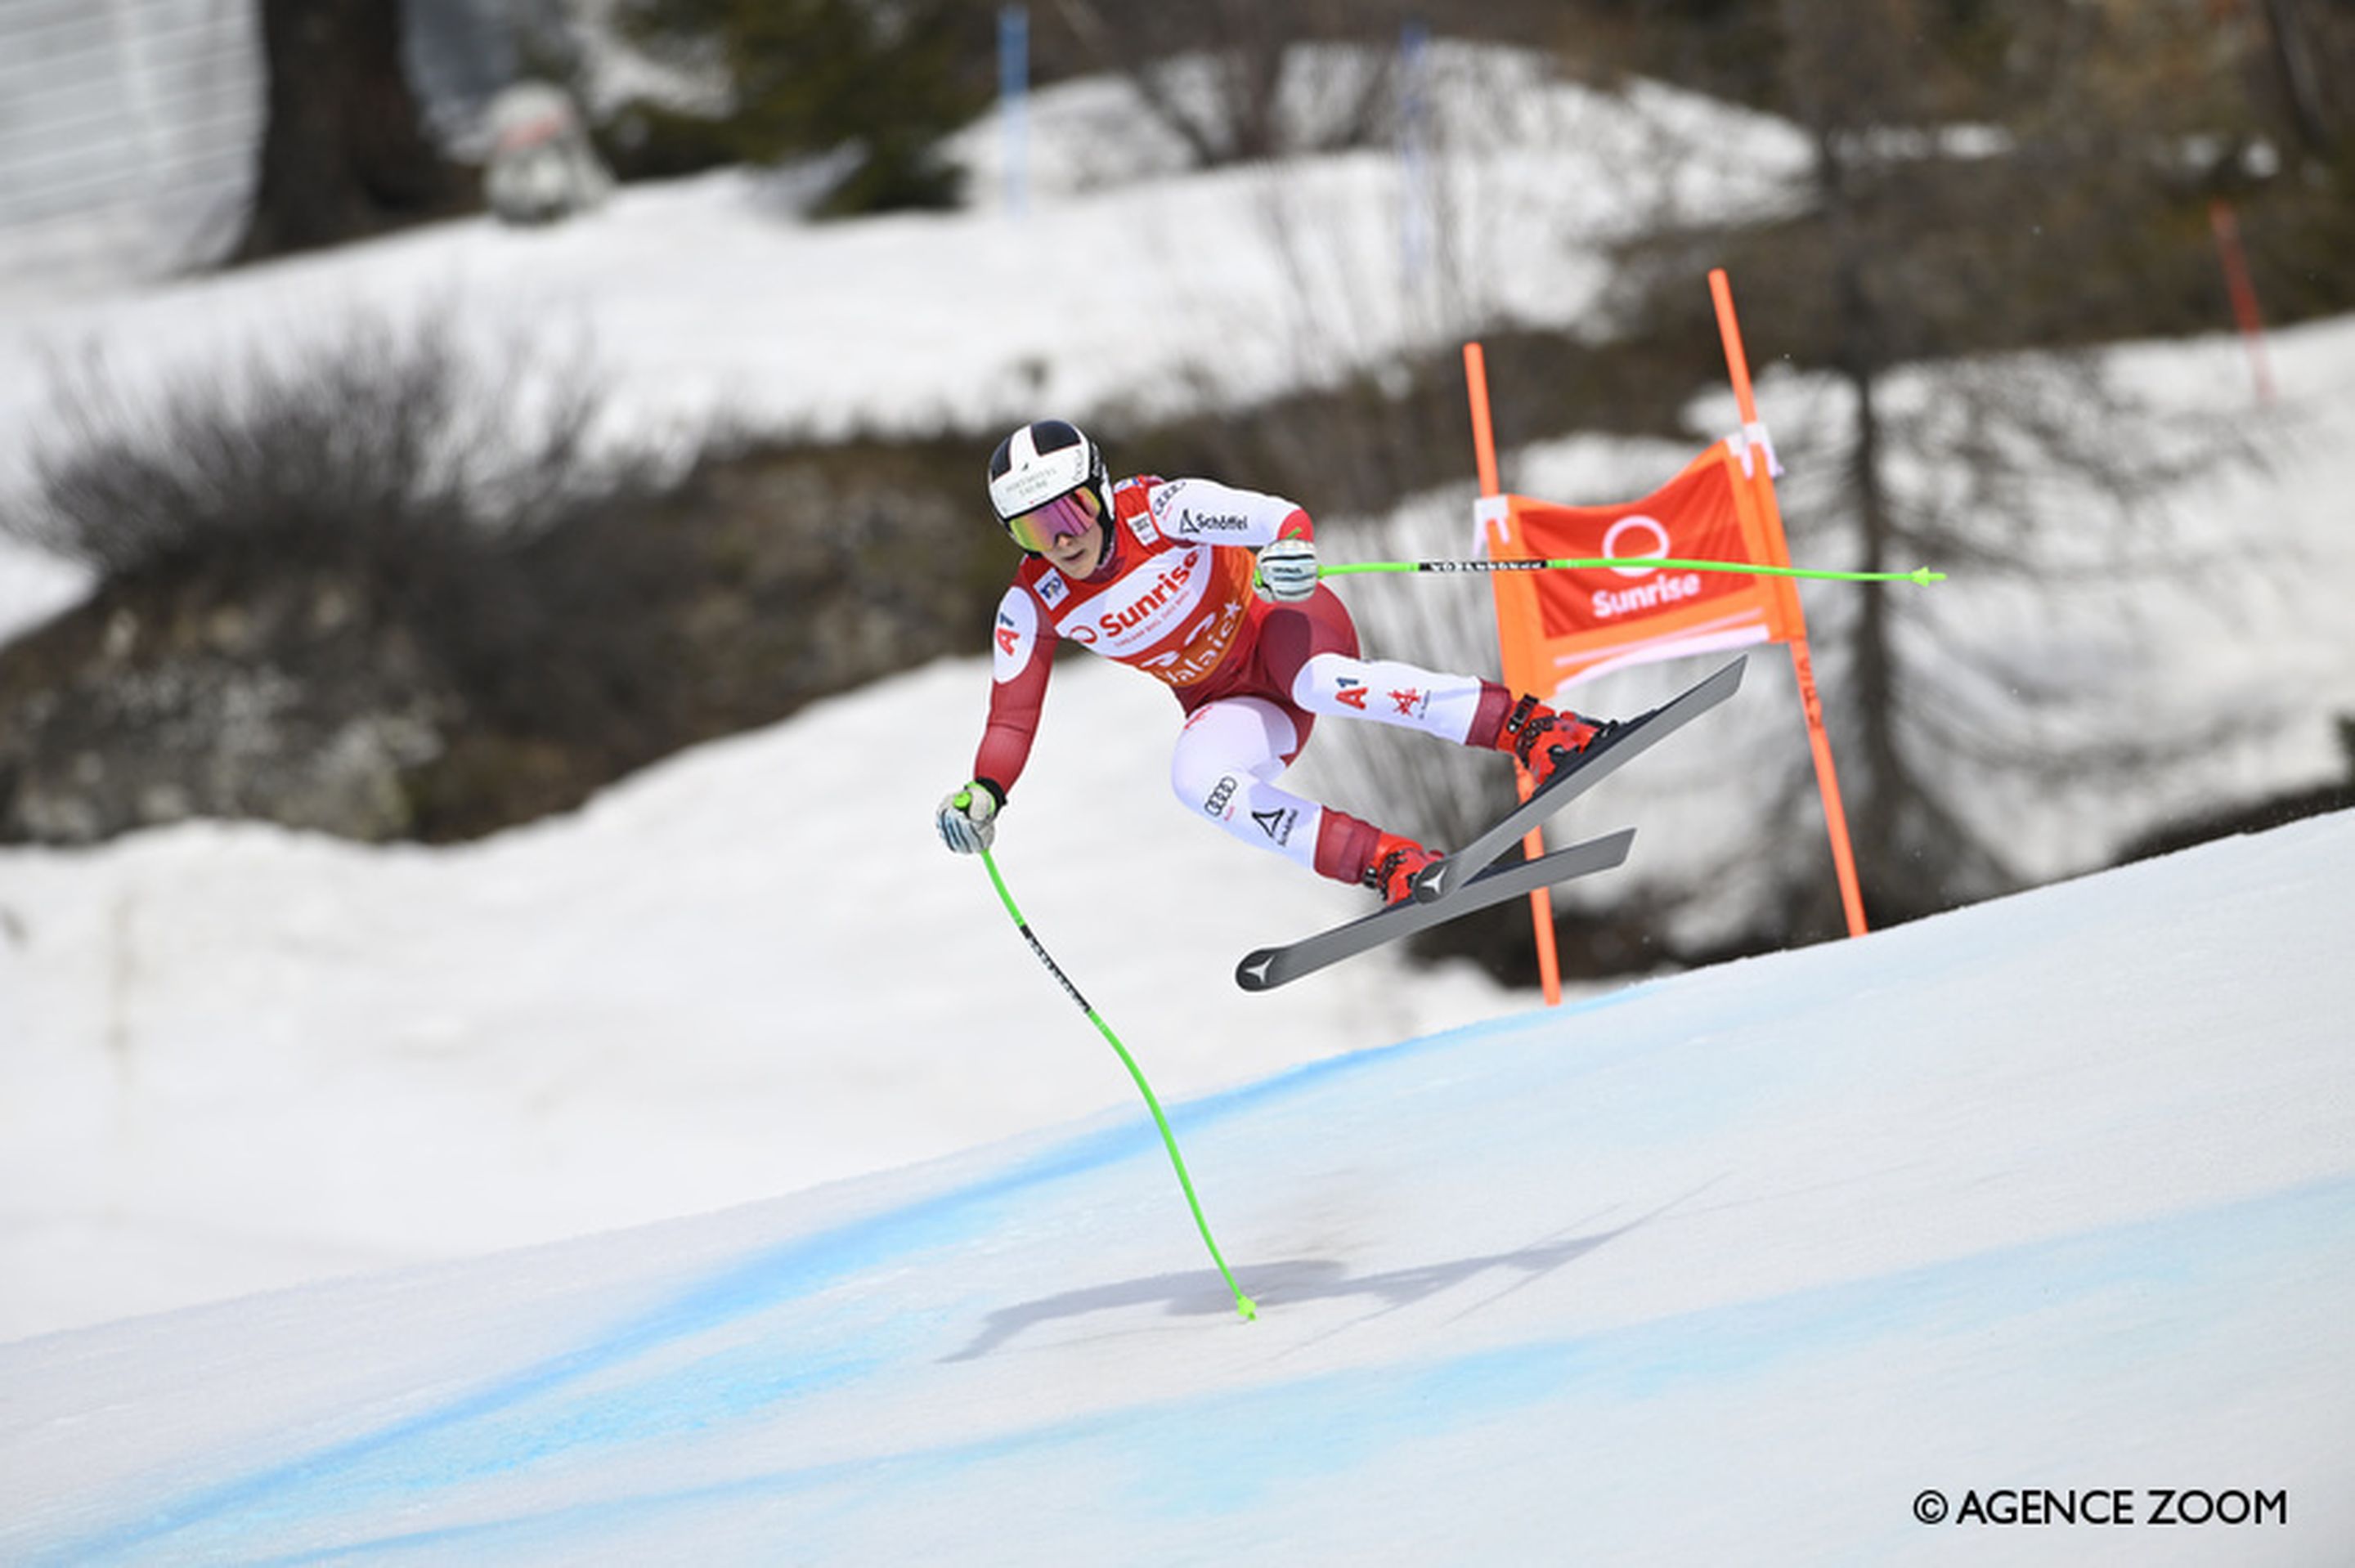 Emily Schoepf (AUT) soaring down the World Cup downhill course in Crans-Montana